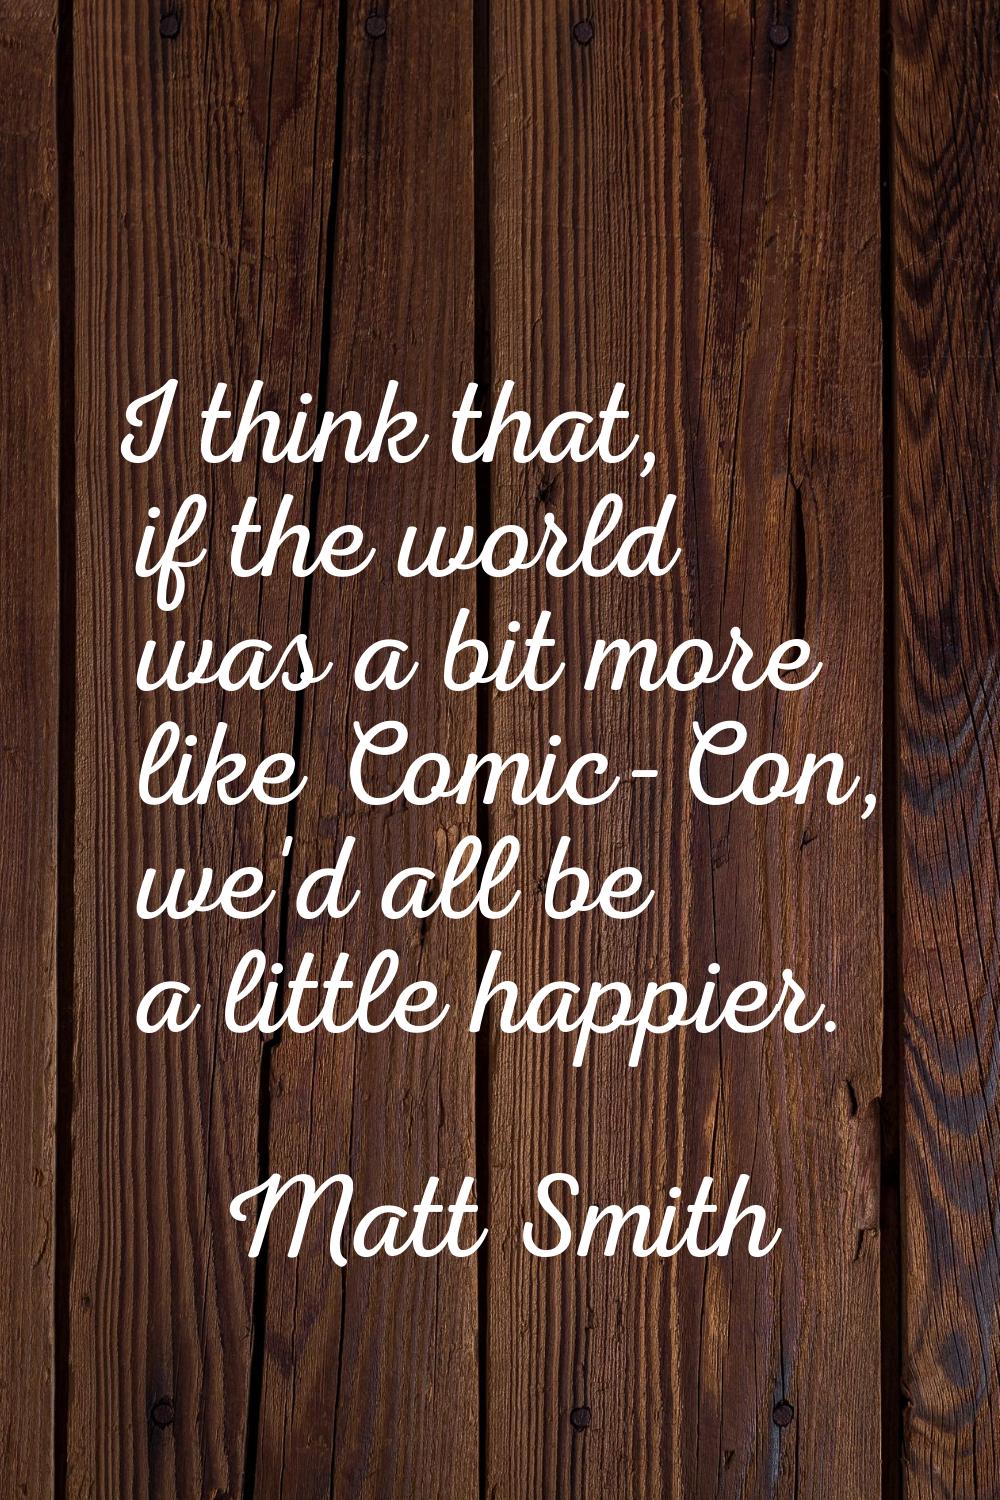 I think that, if the world was a bit more like Comic-Con, we'd all be a little happier.